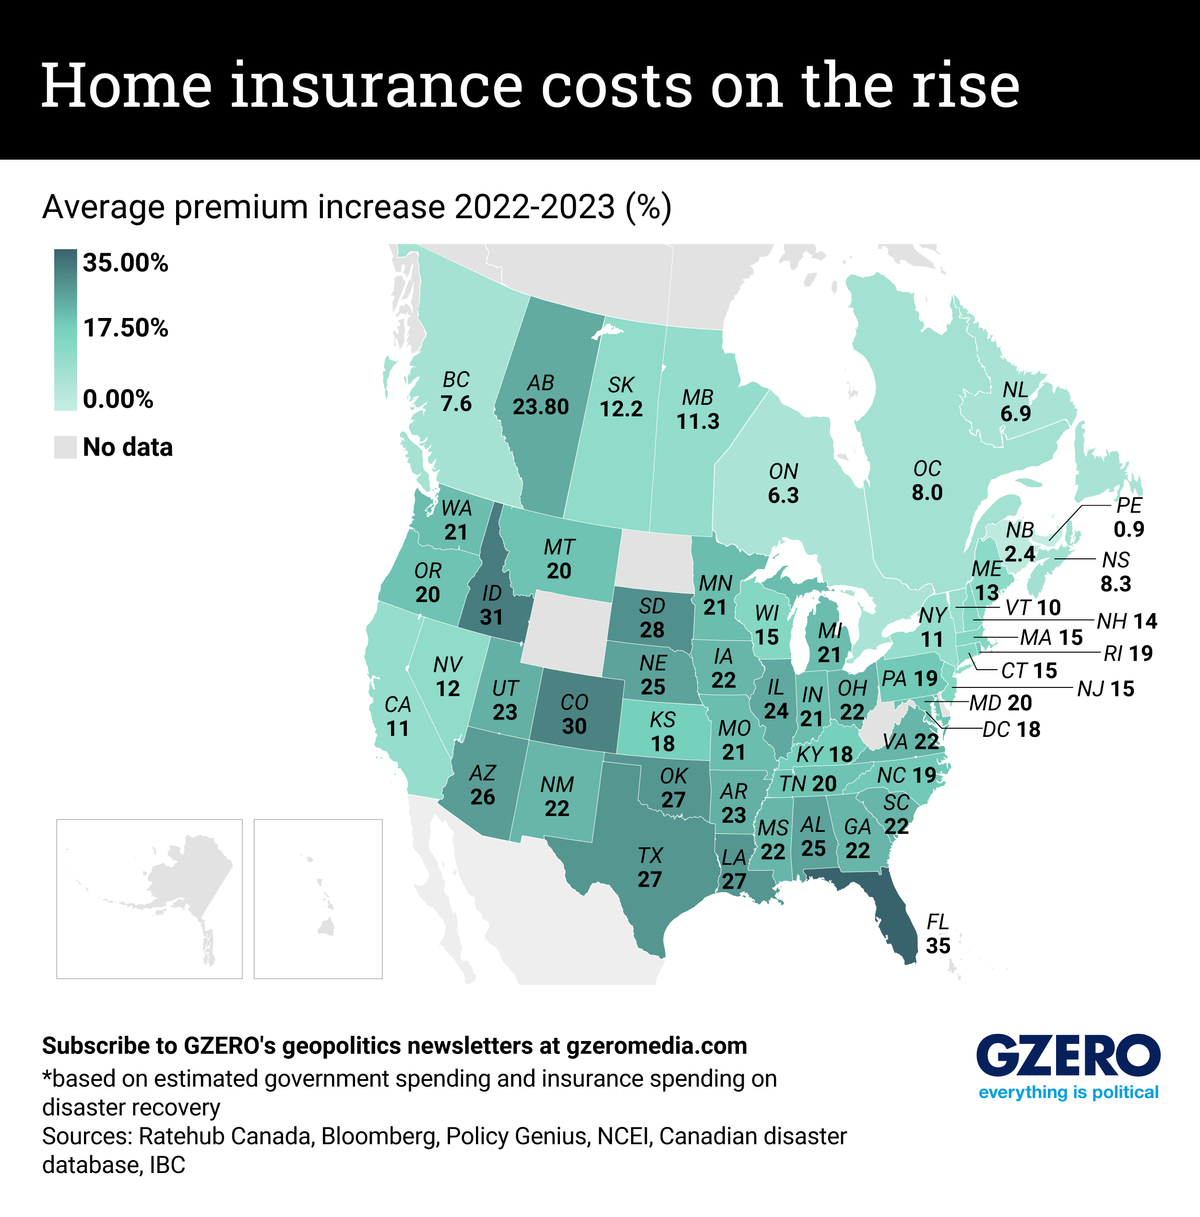 Graphic Truth: Home insurance costs are on the rise